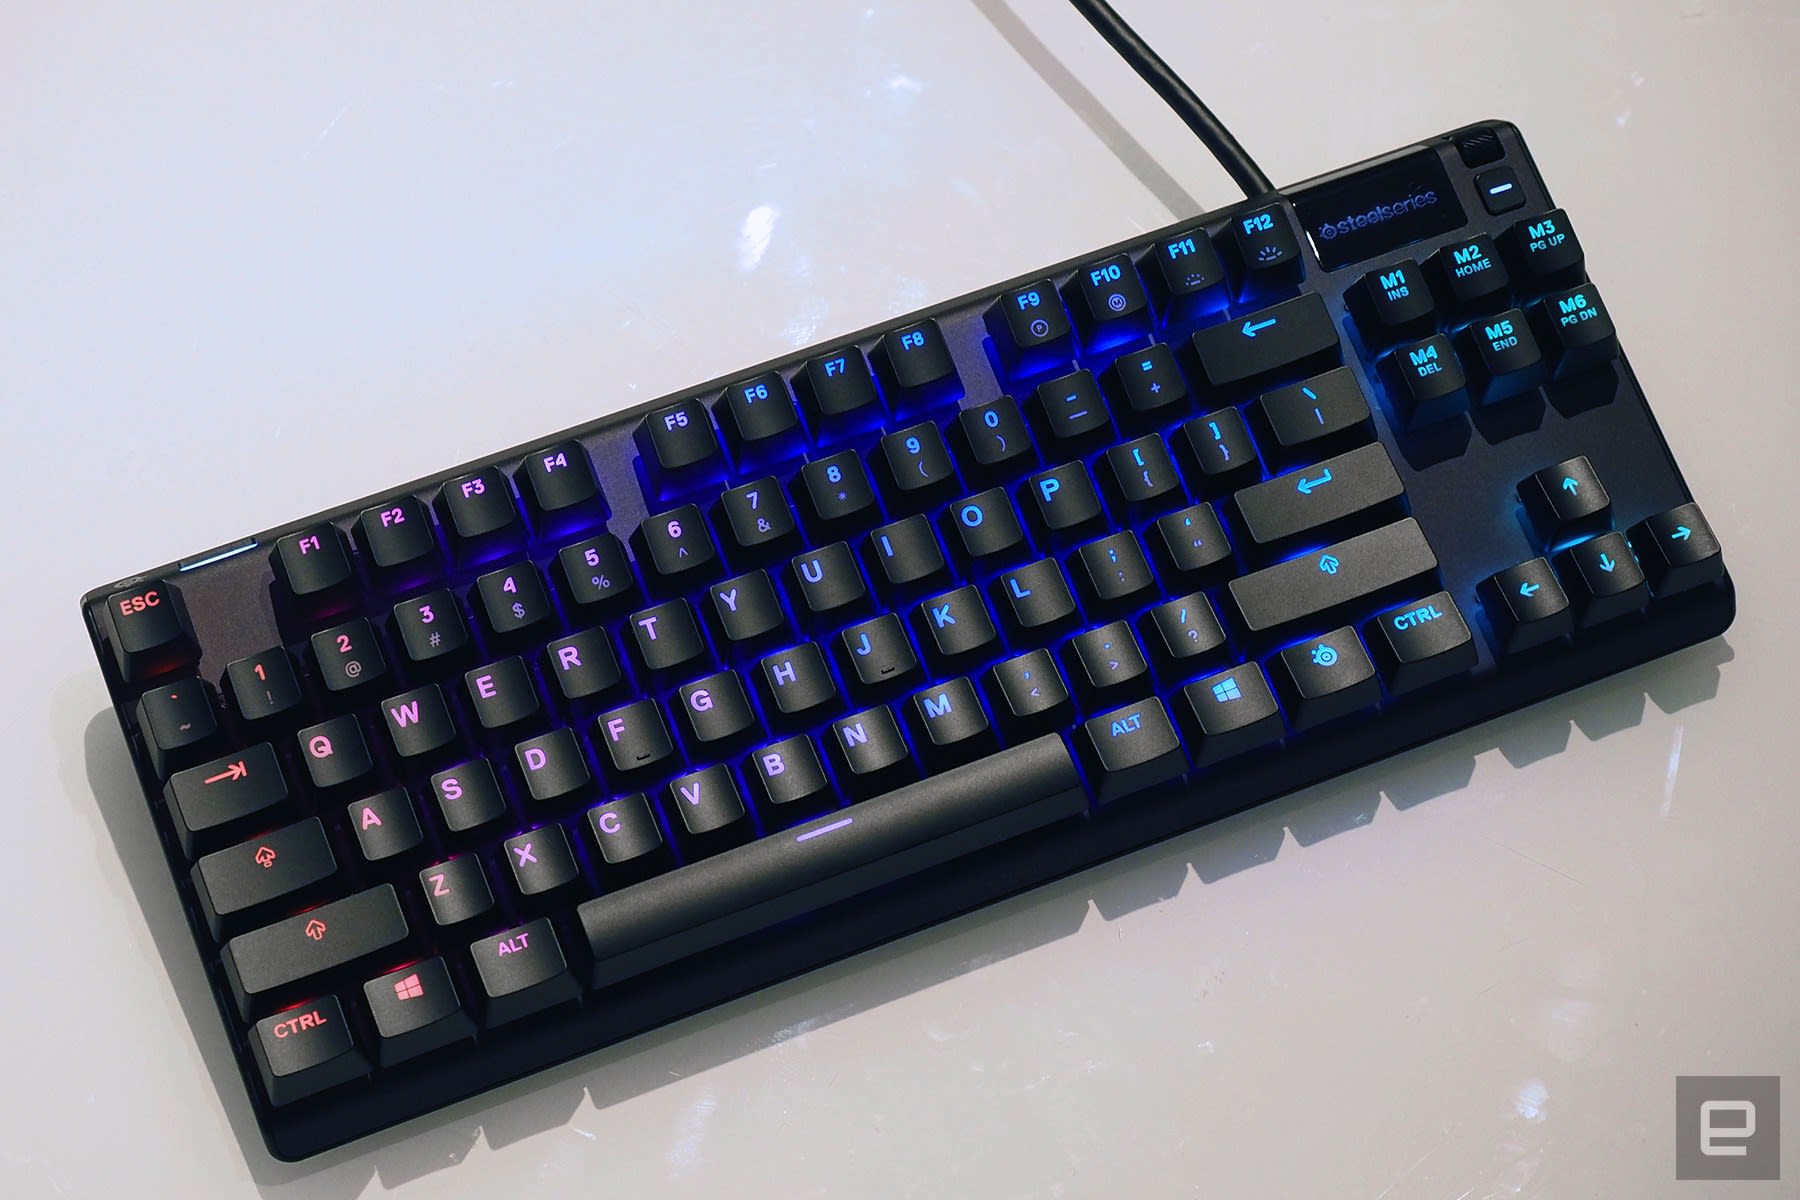 SteelSeries' Apex Pro keyboards have customizable key travel | Engadget